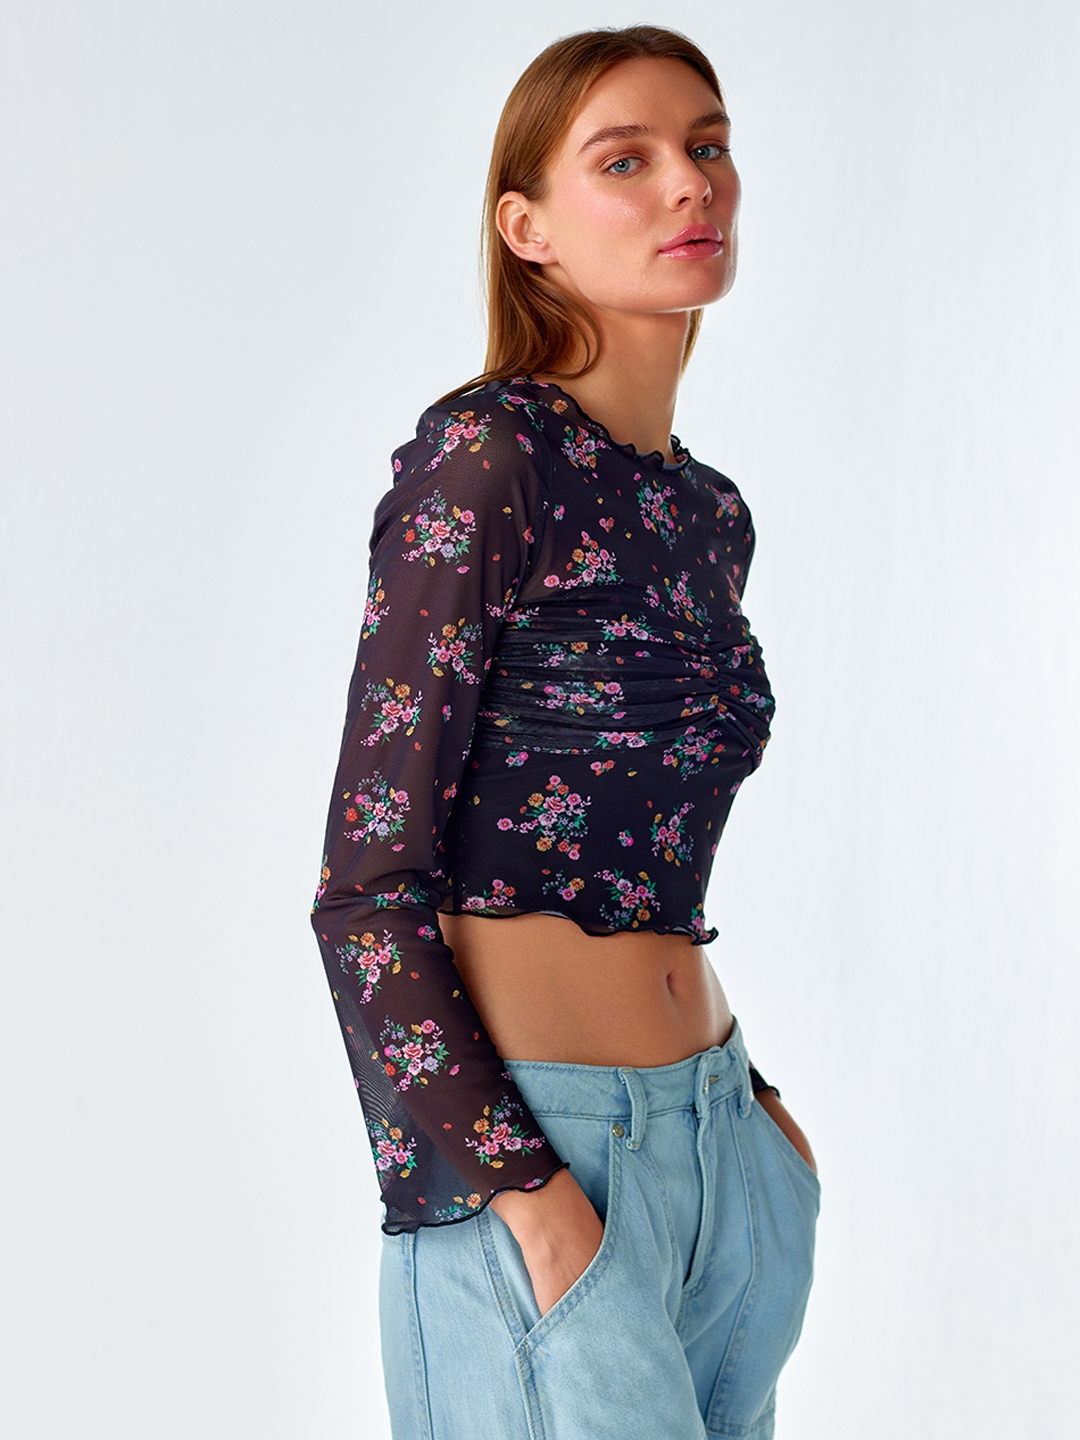 Black Abstract Printed Mesh Top - Cover Story